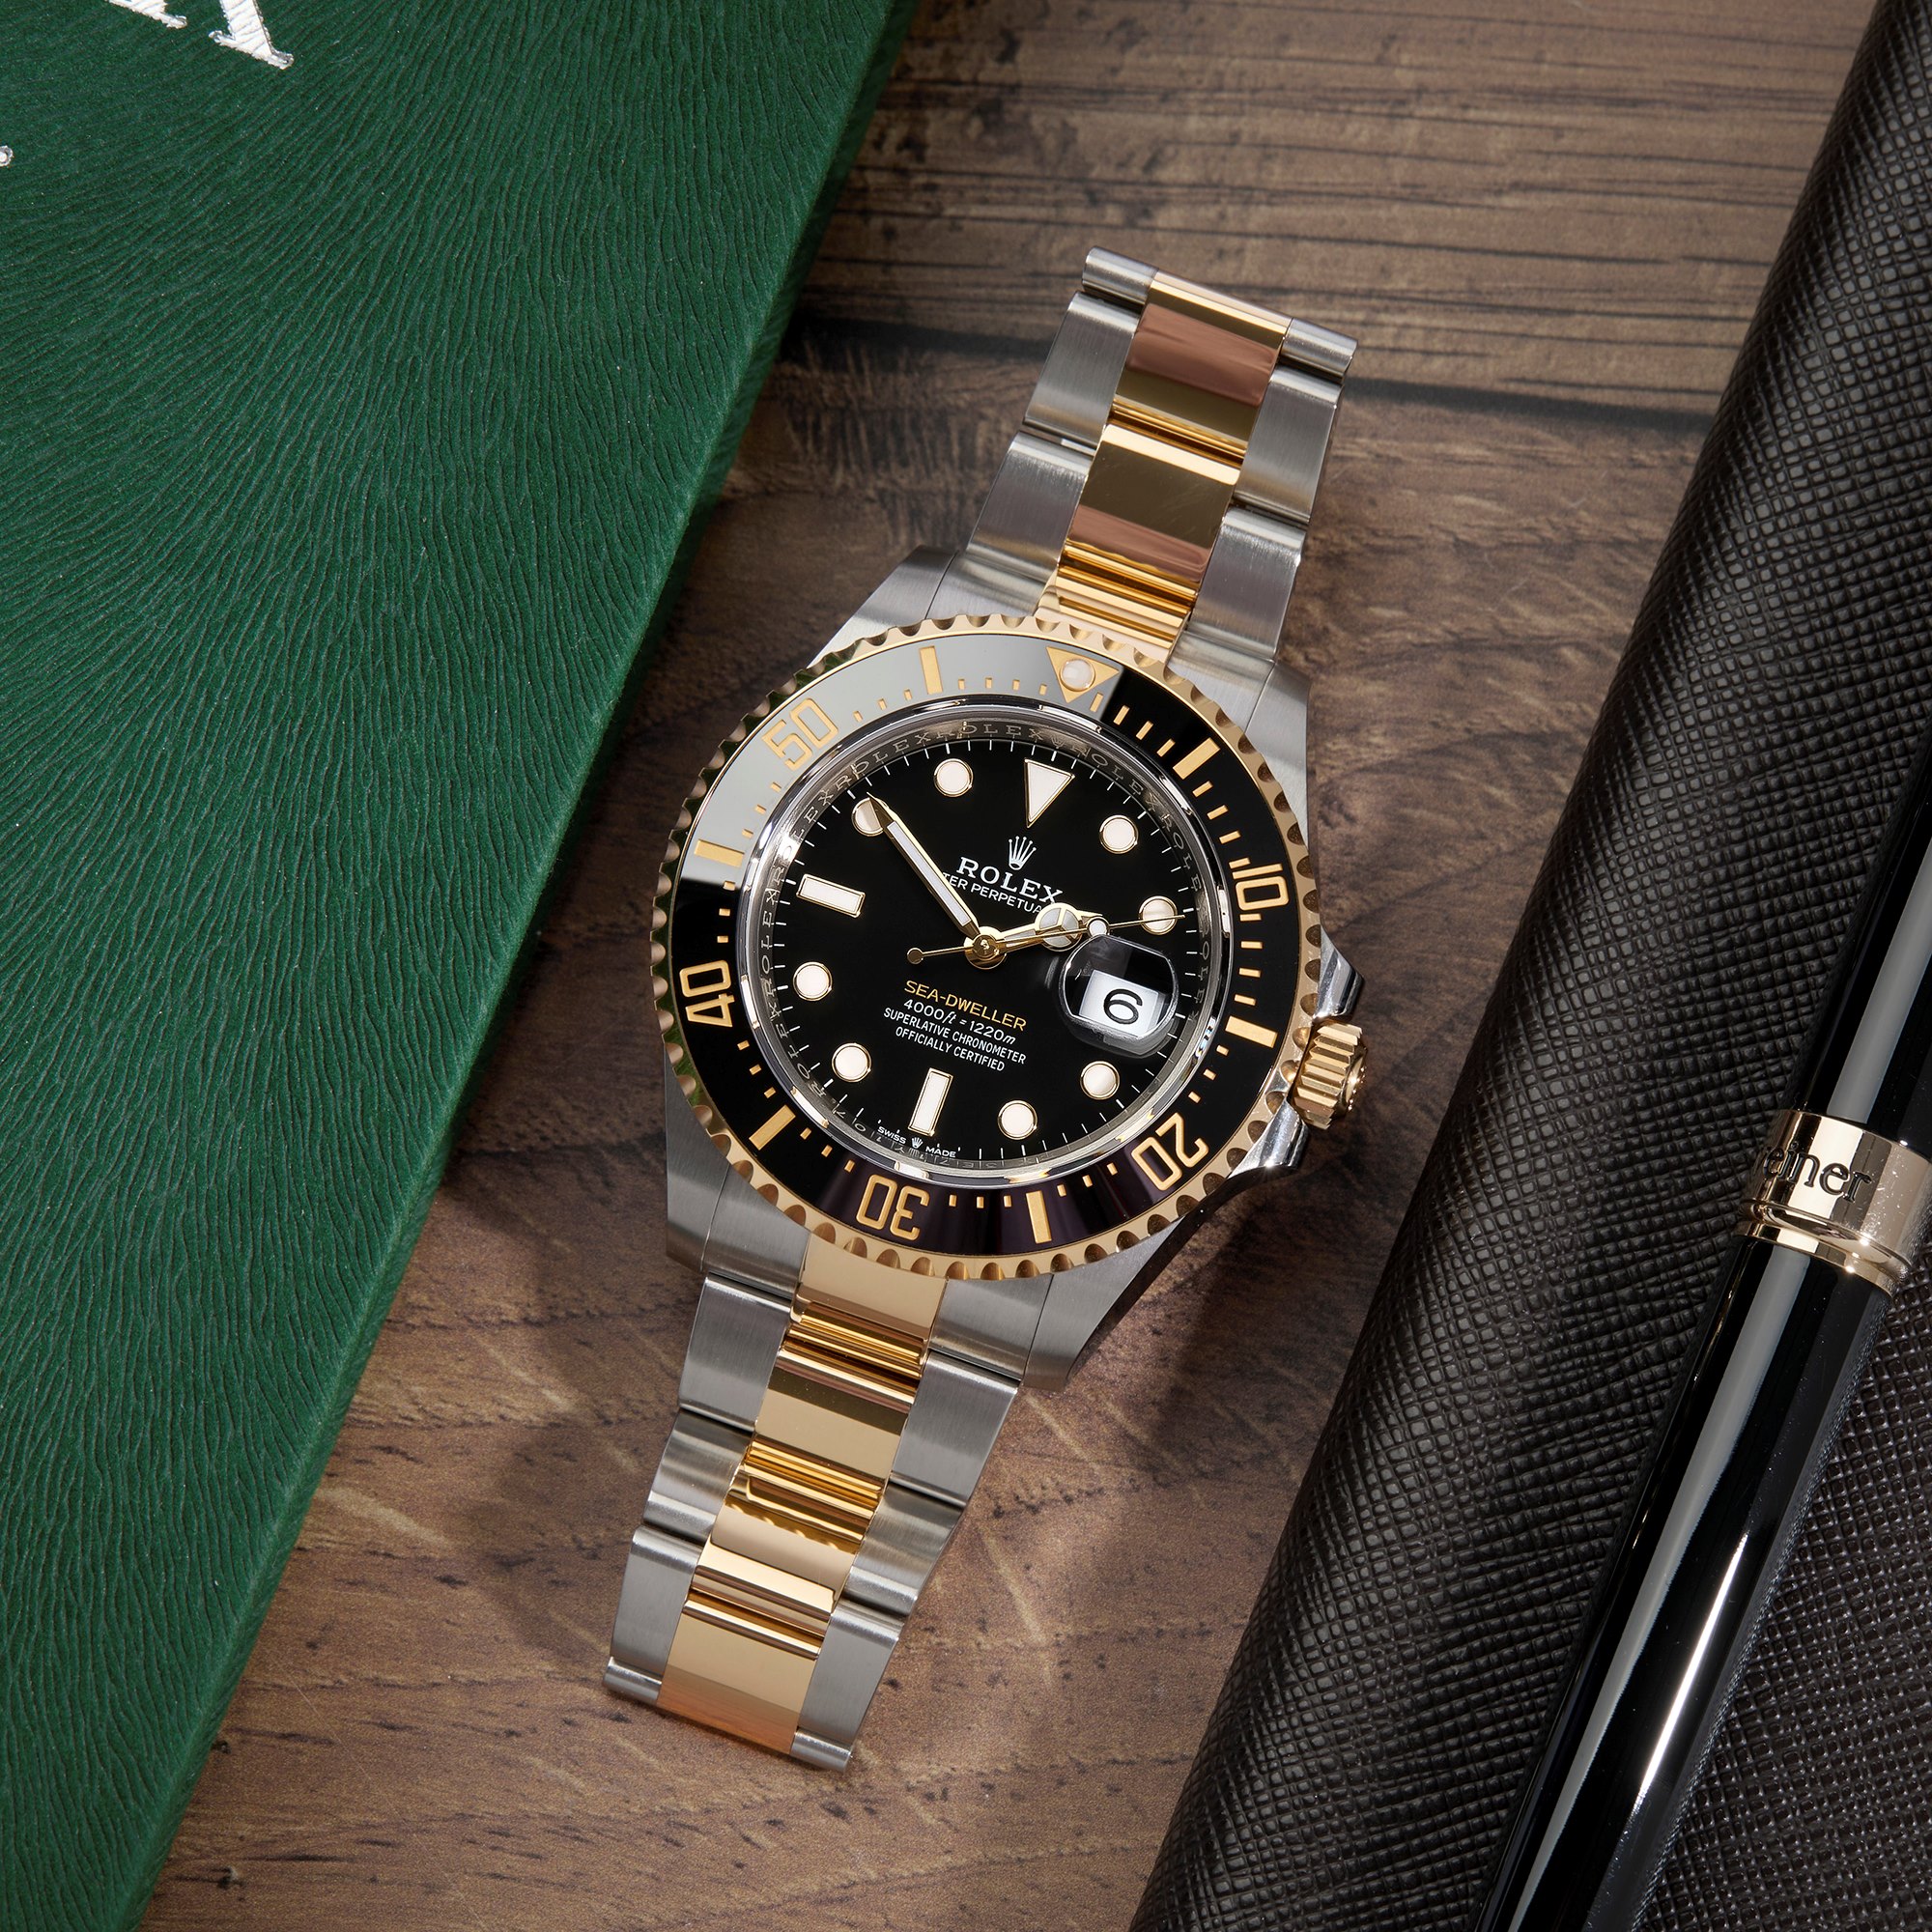 Rolex Sea-Dweller Yellow Gold & Stainless Steel 126603